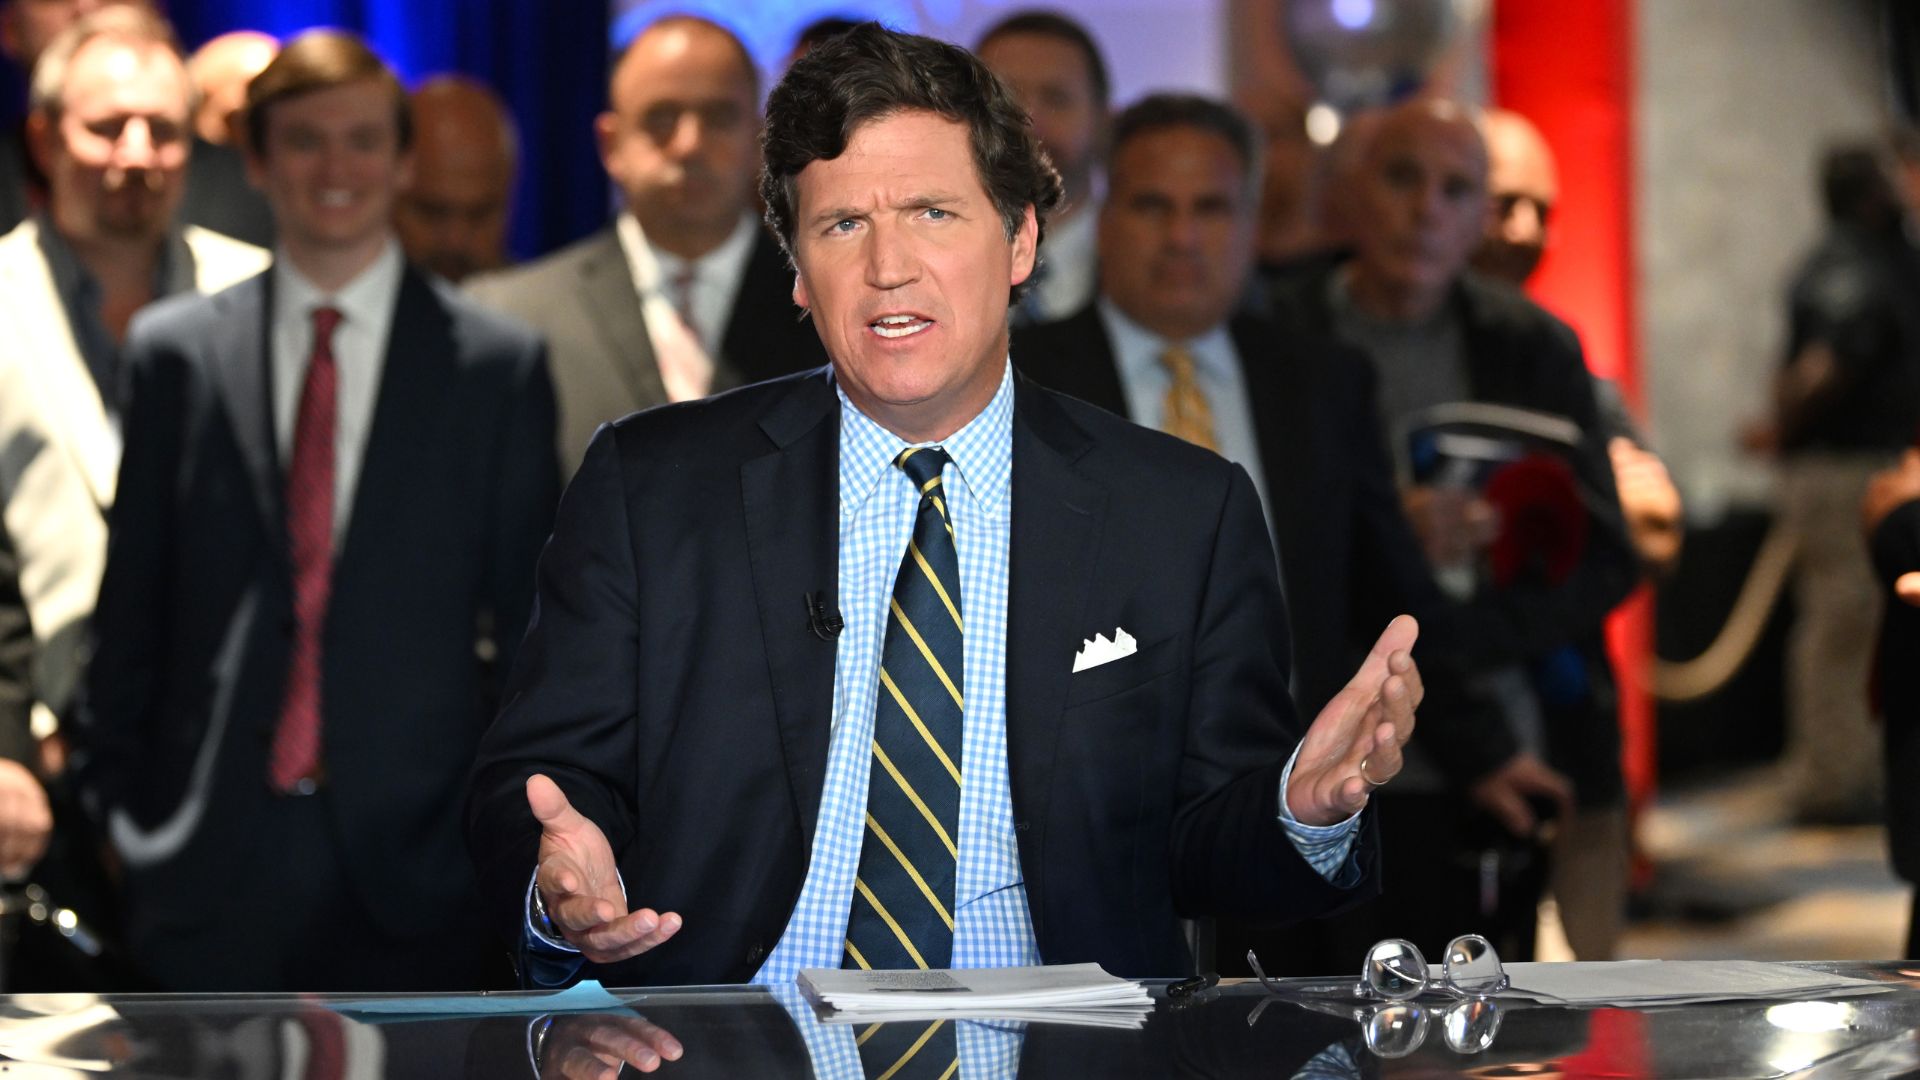 Tucker Carlson was asked to run for president, but declined.